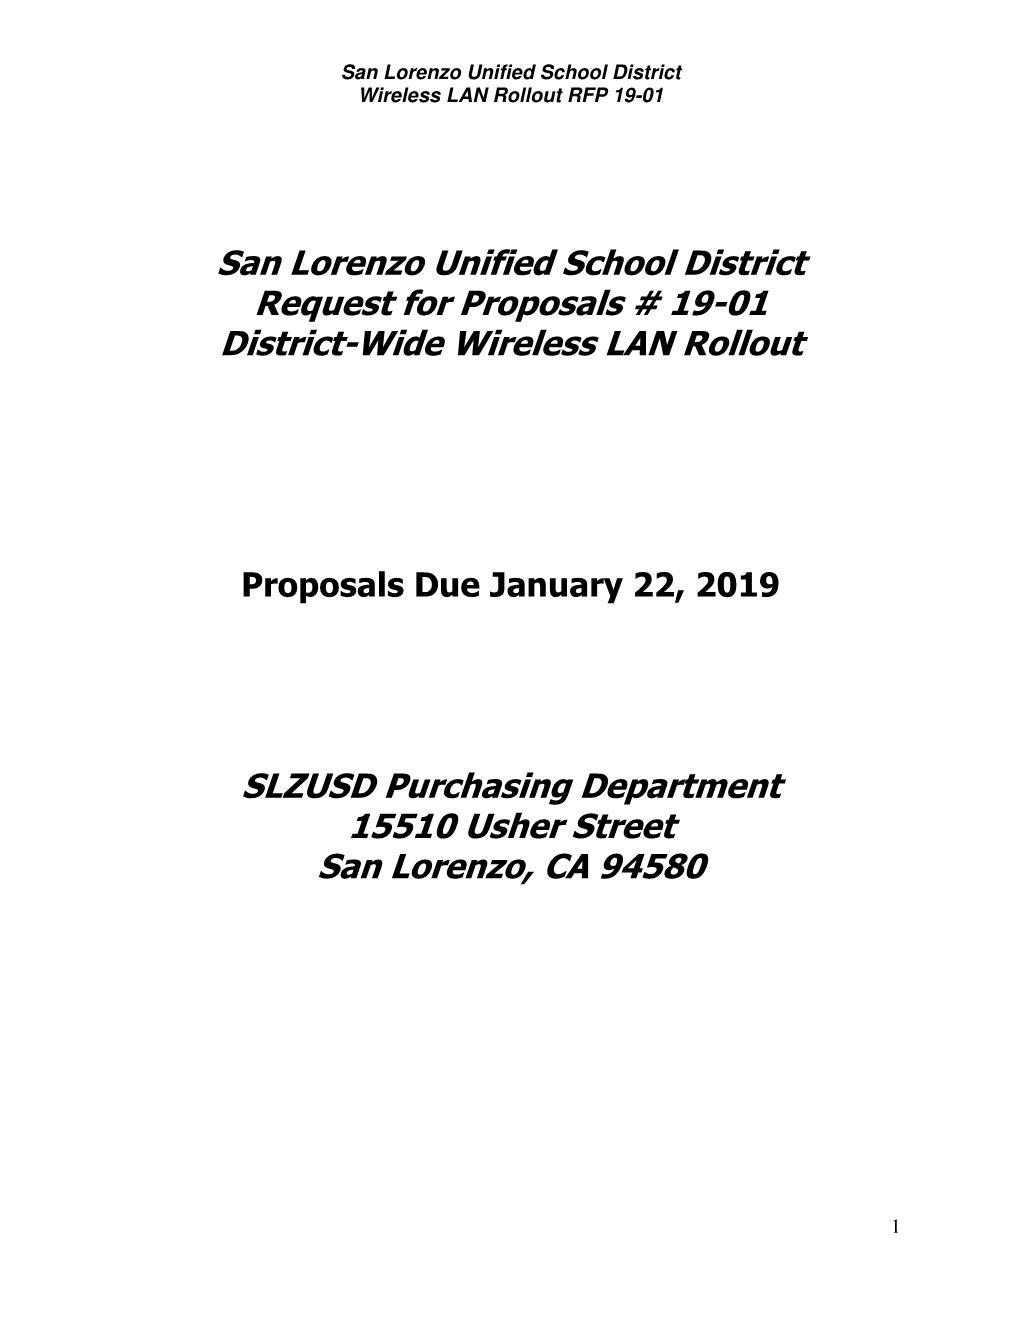 San Lorenzo Unified School District Request for Proposals # 19-01 District-Wide Wireless LAN Rollout